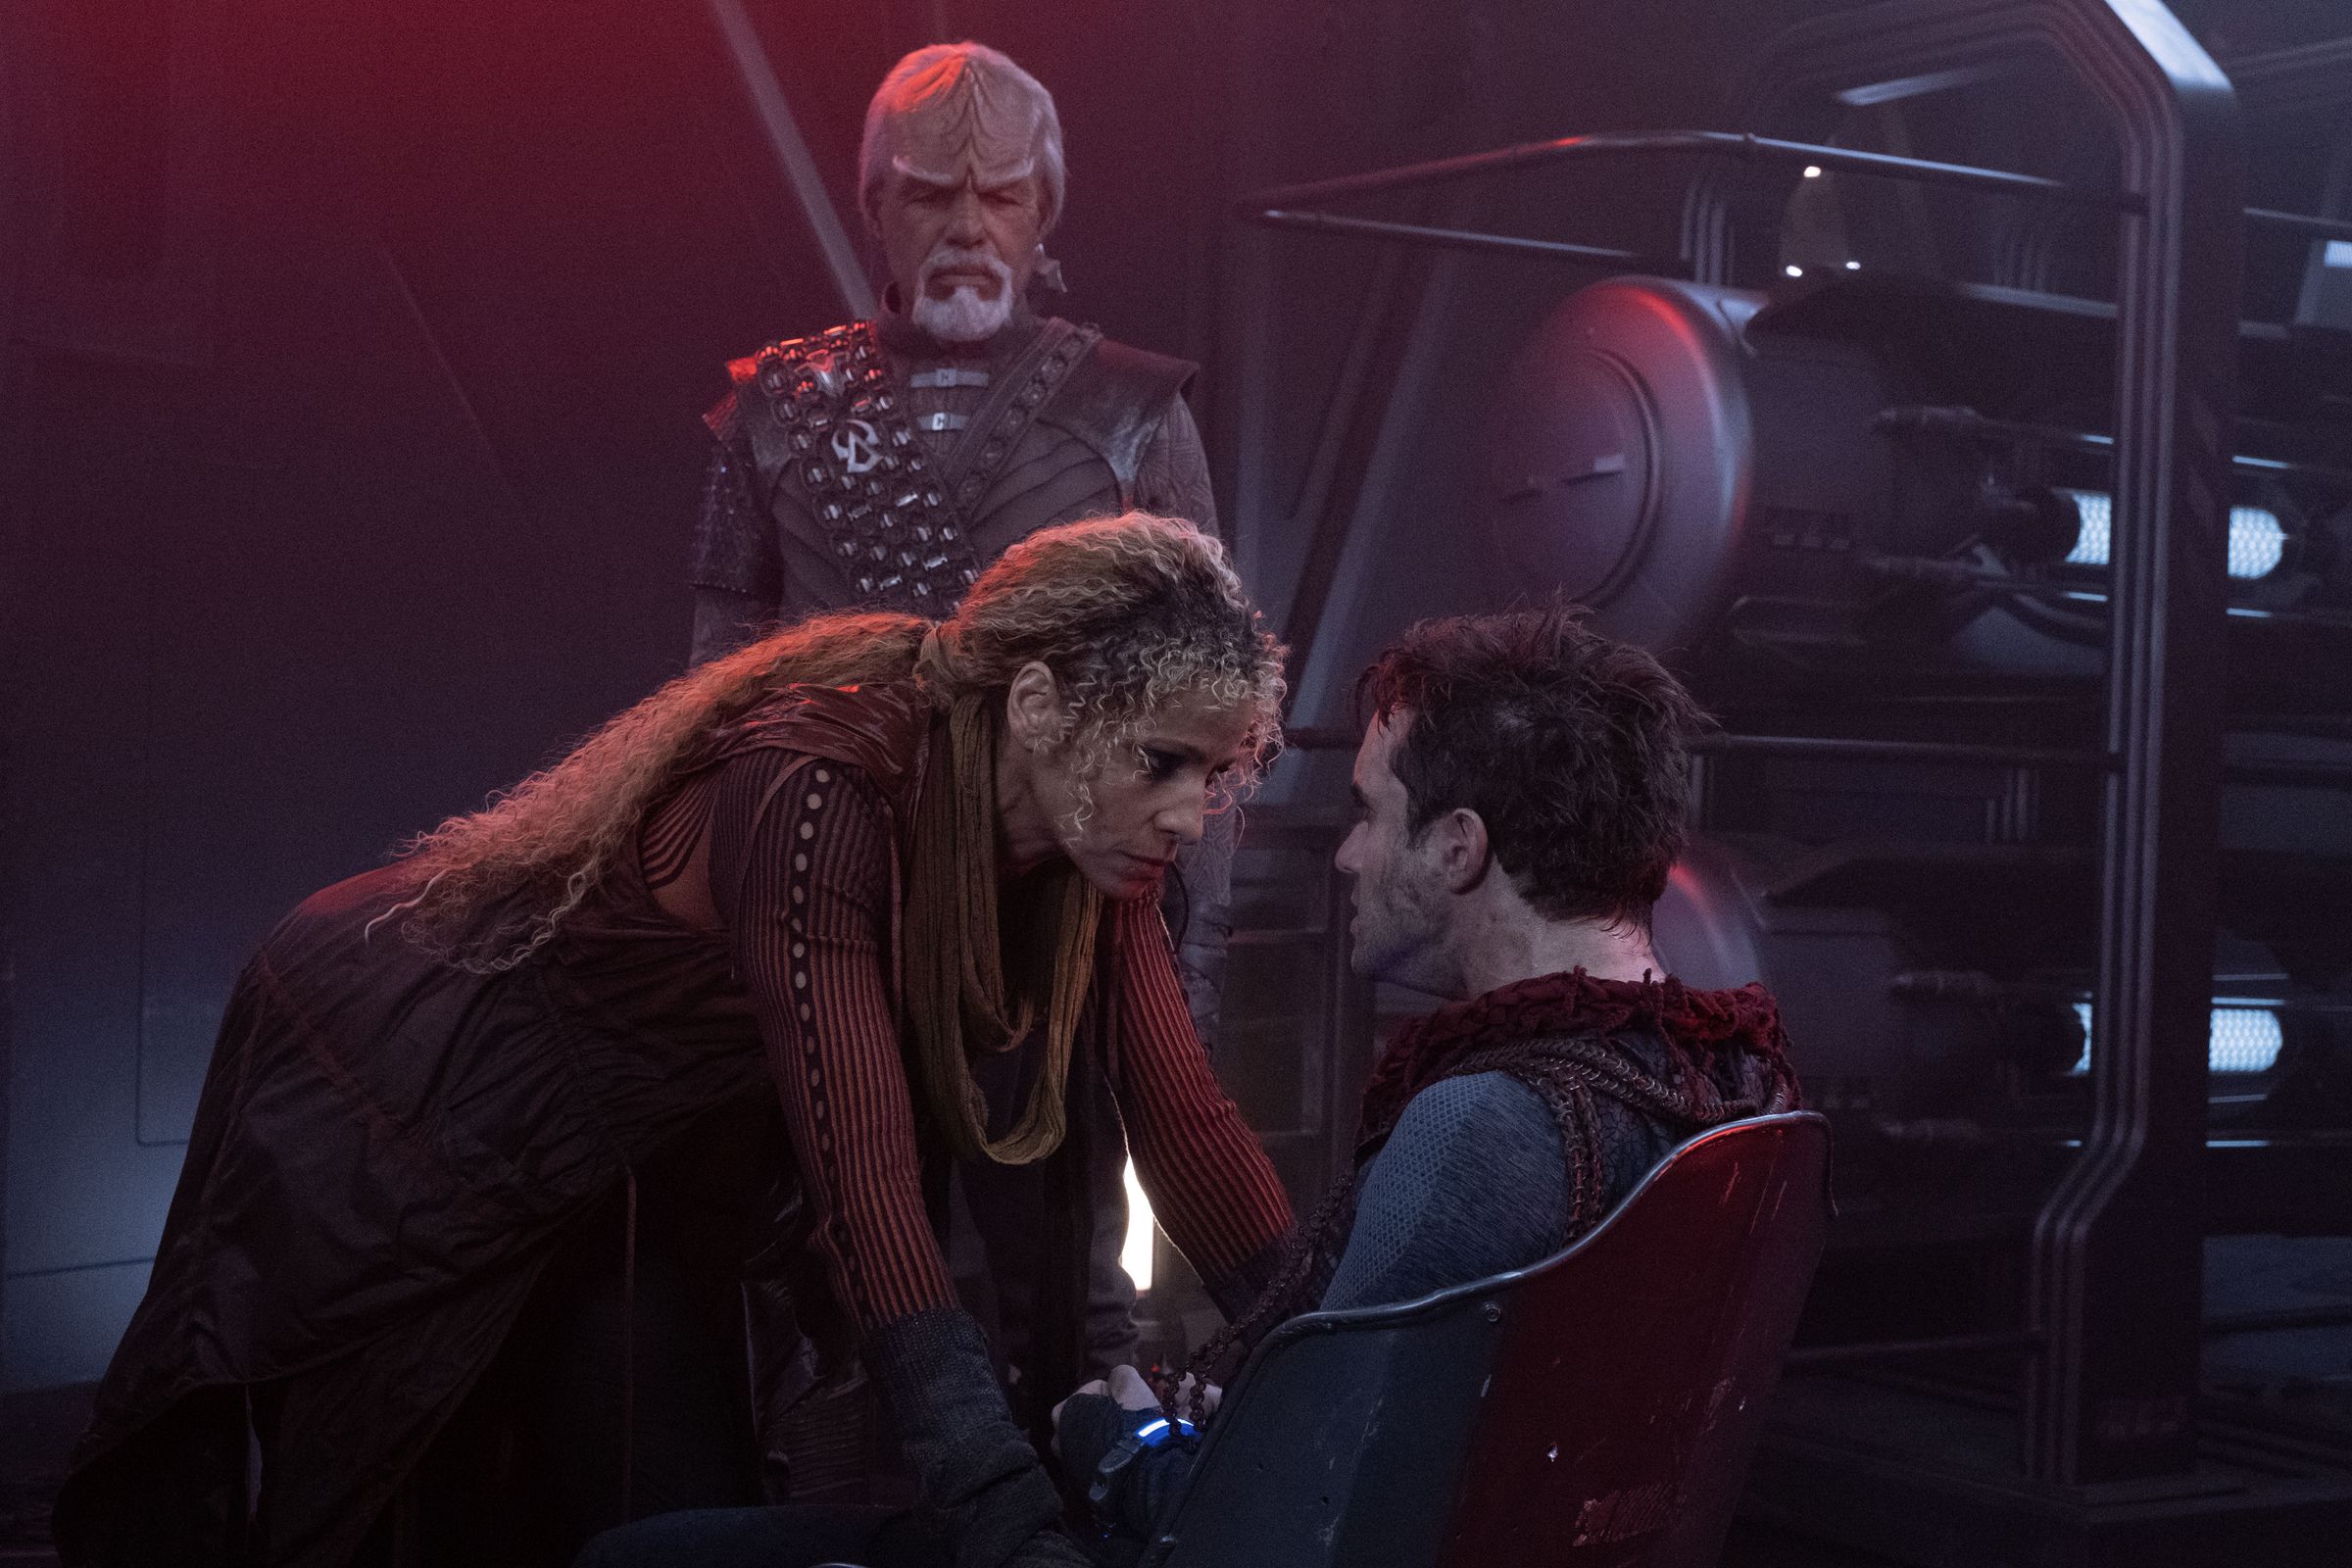 Worf, an older male Klingon, and Raffi, a Black woman with blond hair, interrogate a greasy white male villain.